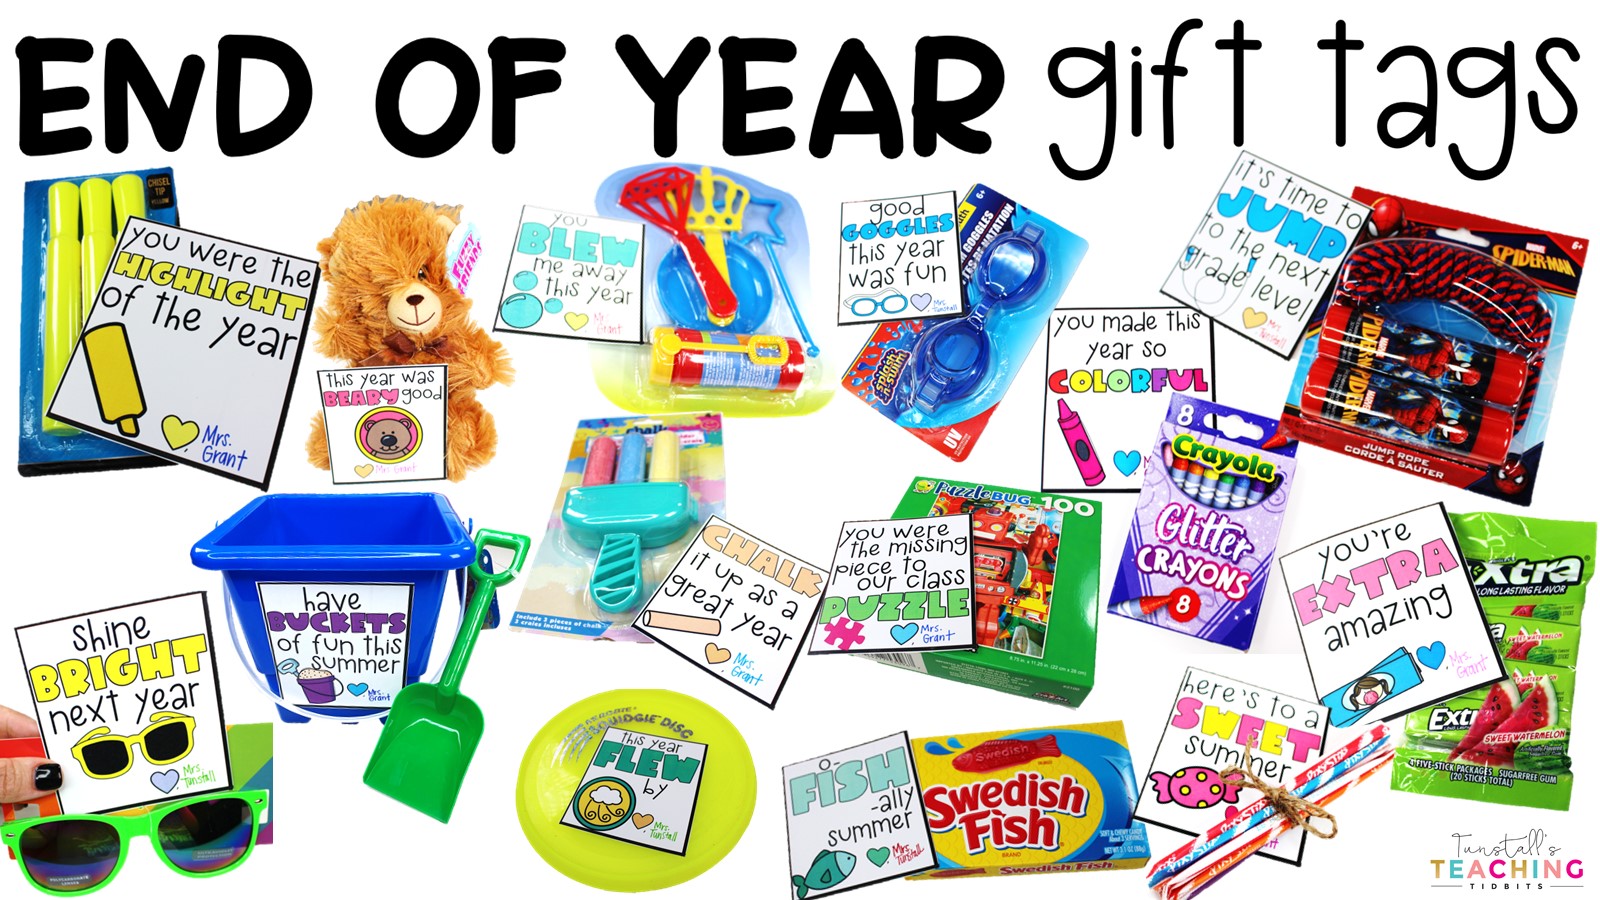 End of year gift tags with little dollar store toys and cute tags for giving to teachers and students